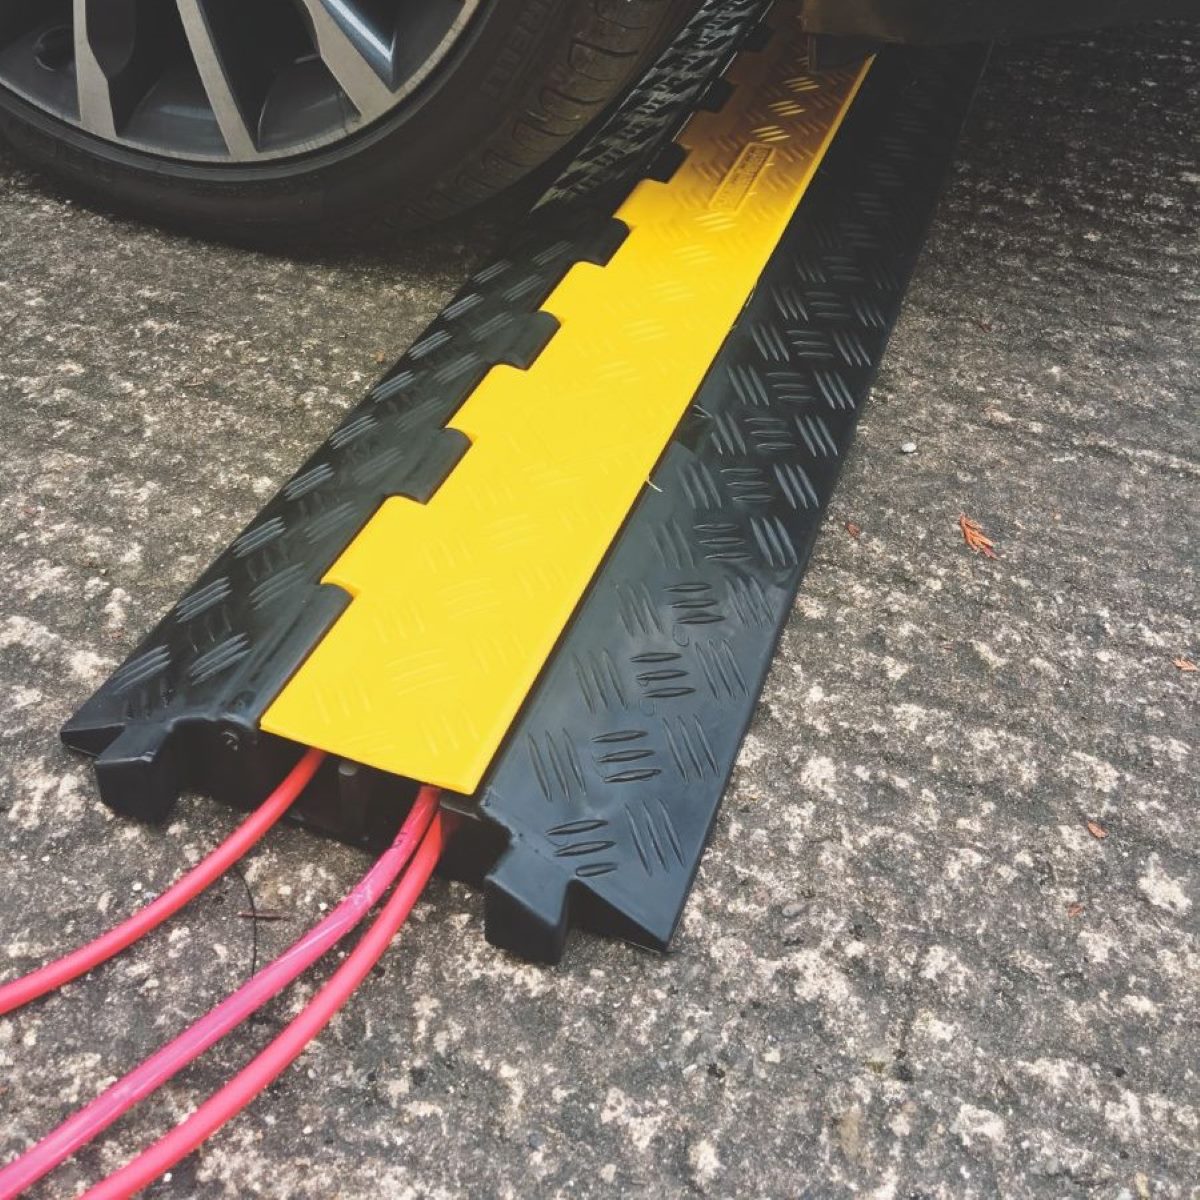 How To Protect Electrical Cord Over Roadway